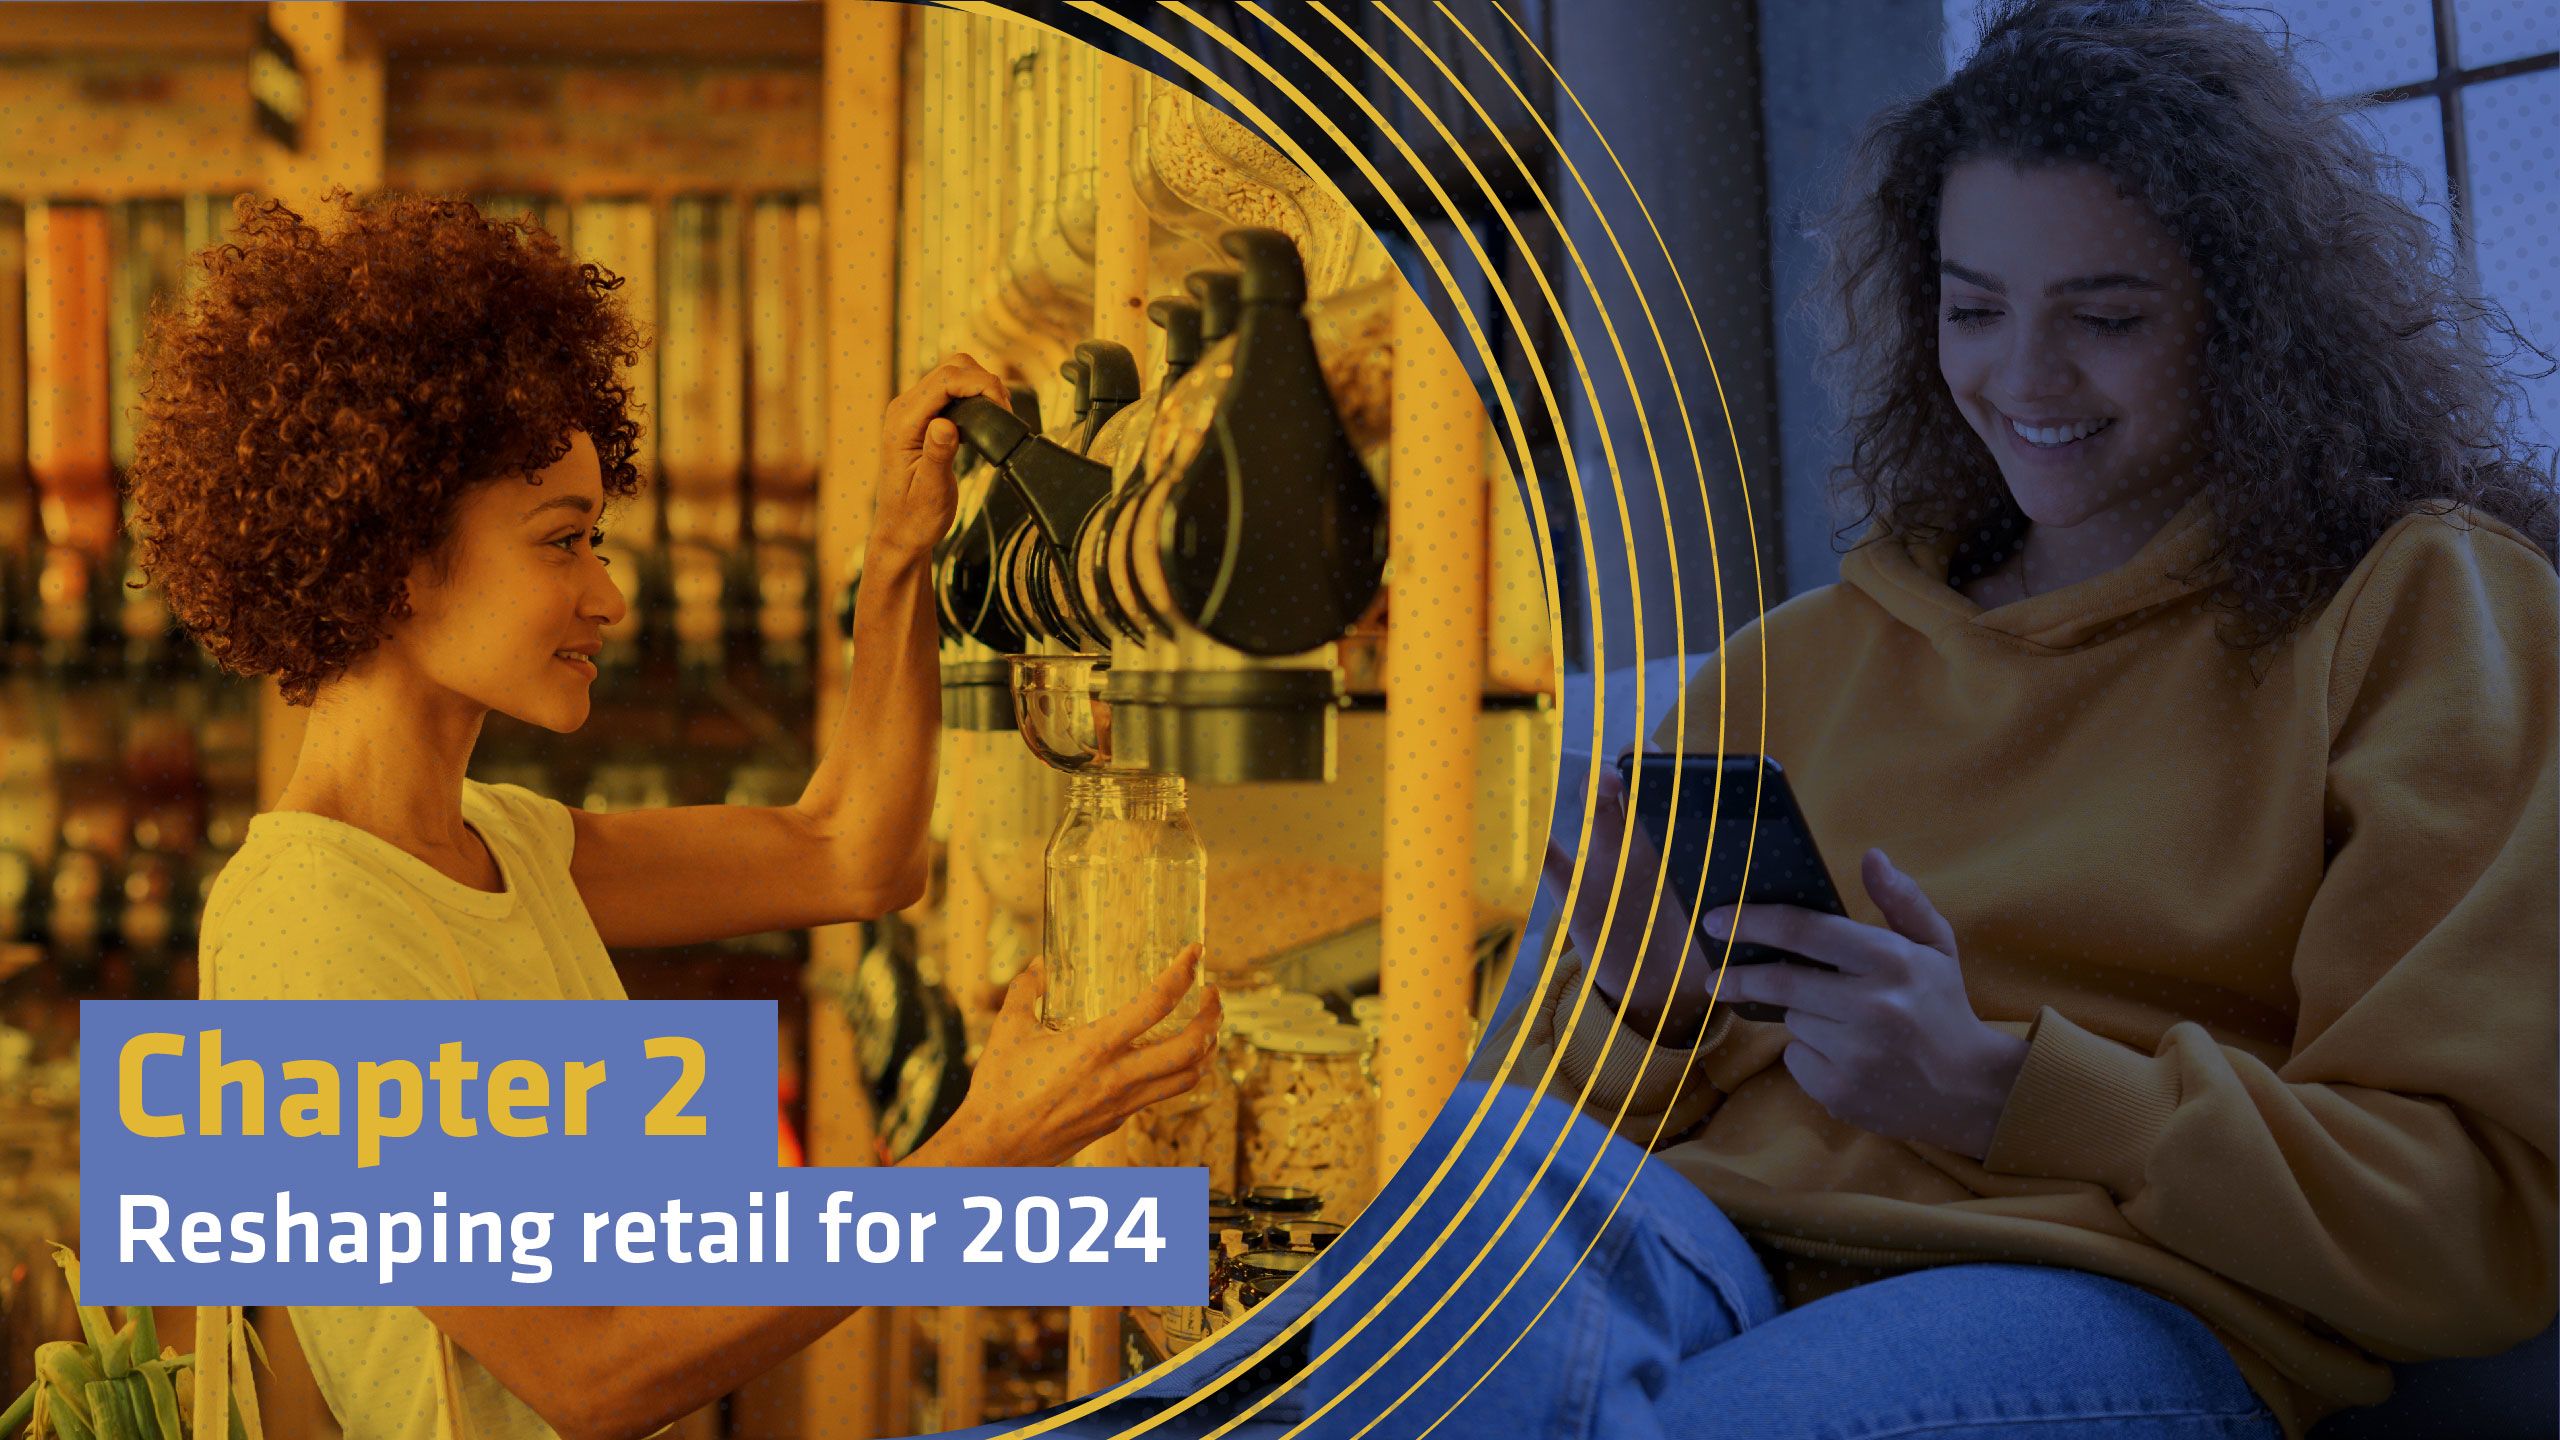 Image shows woman using refill station in store and another woman on her phone. Text reads: Chapter 2: Reshaping retail for 2024